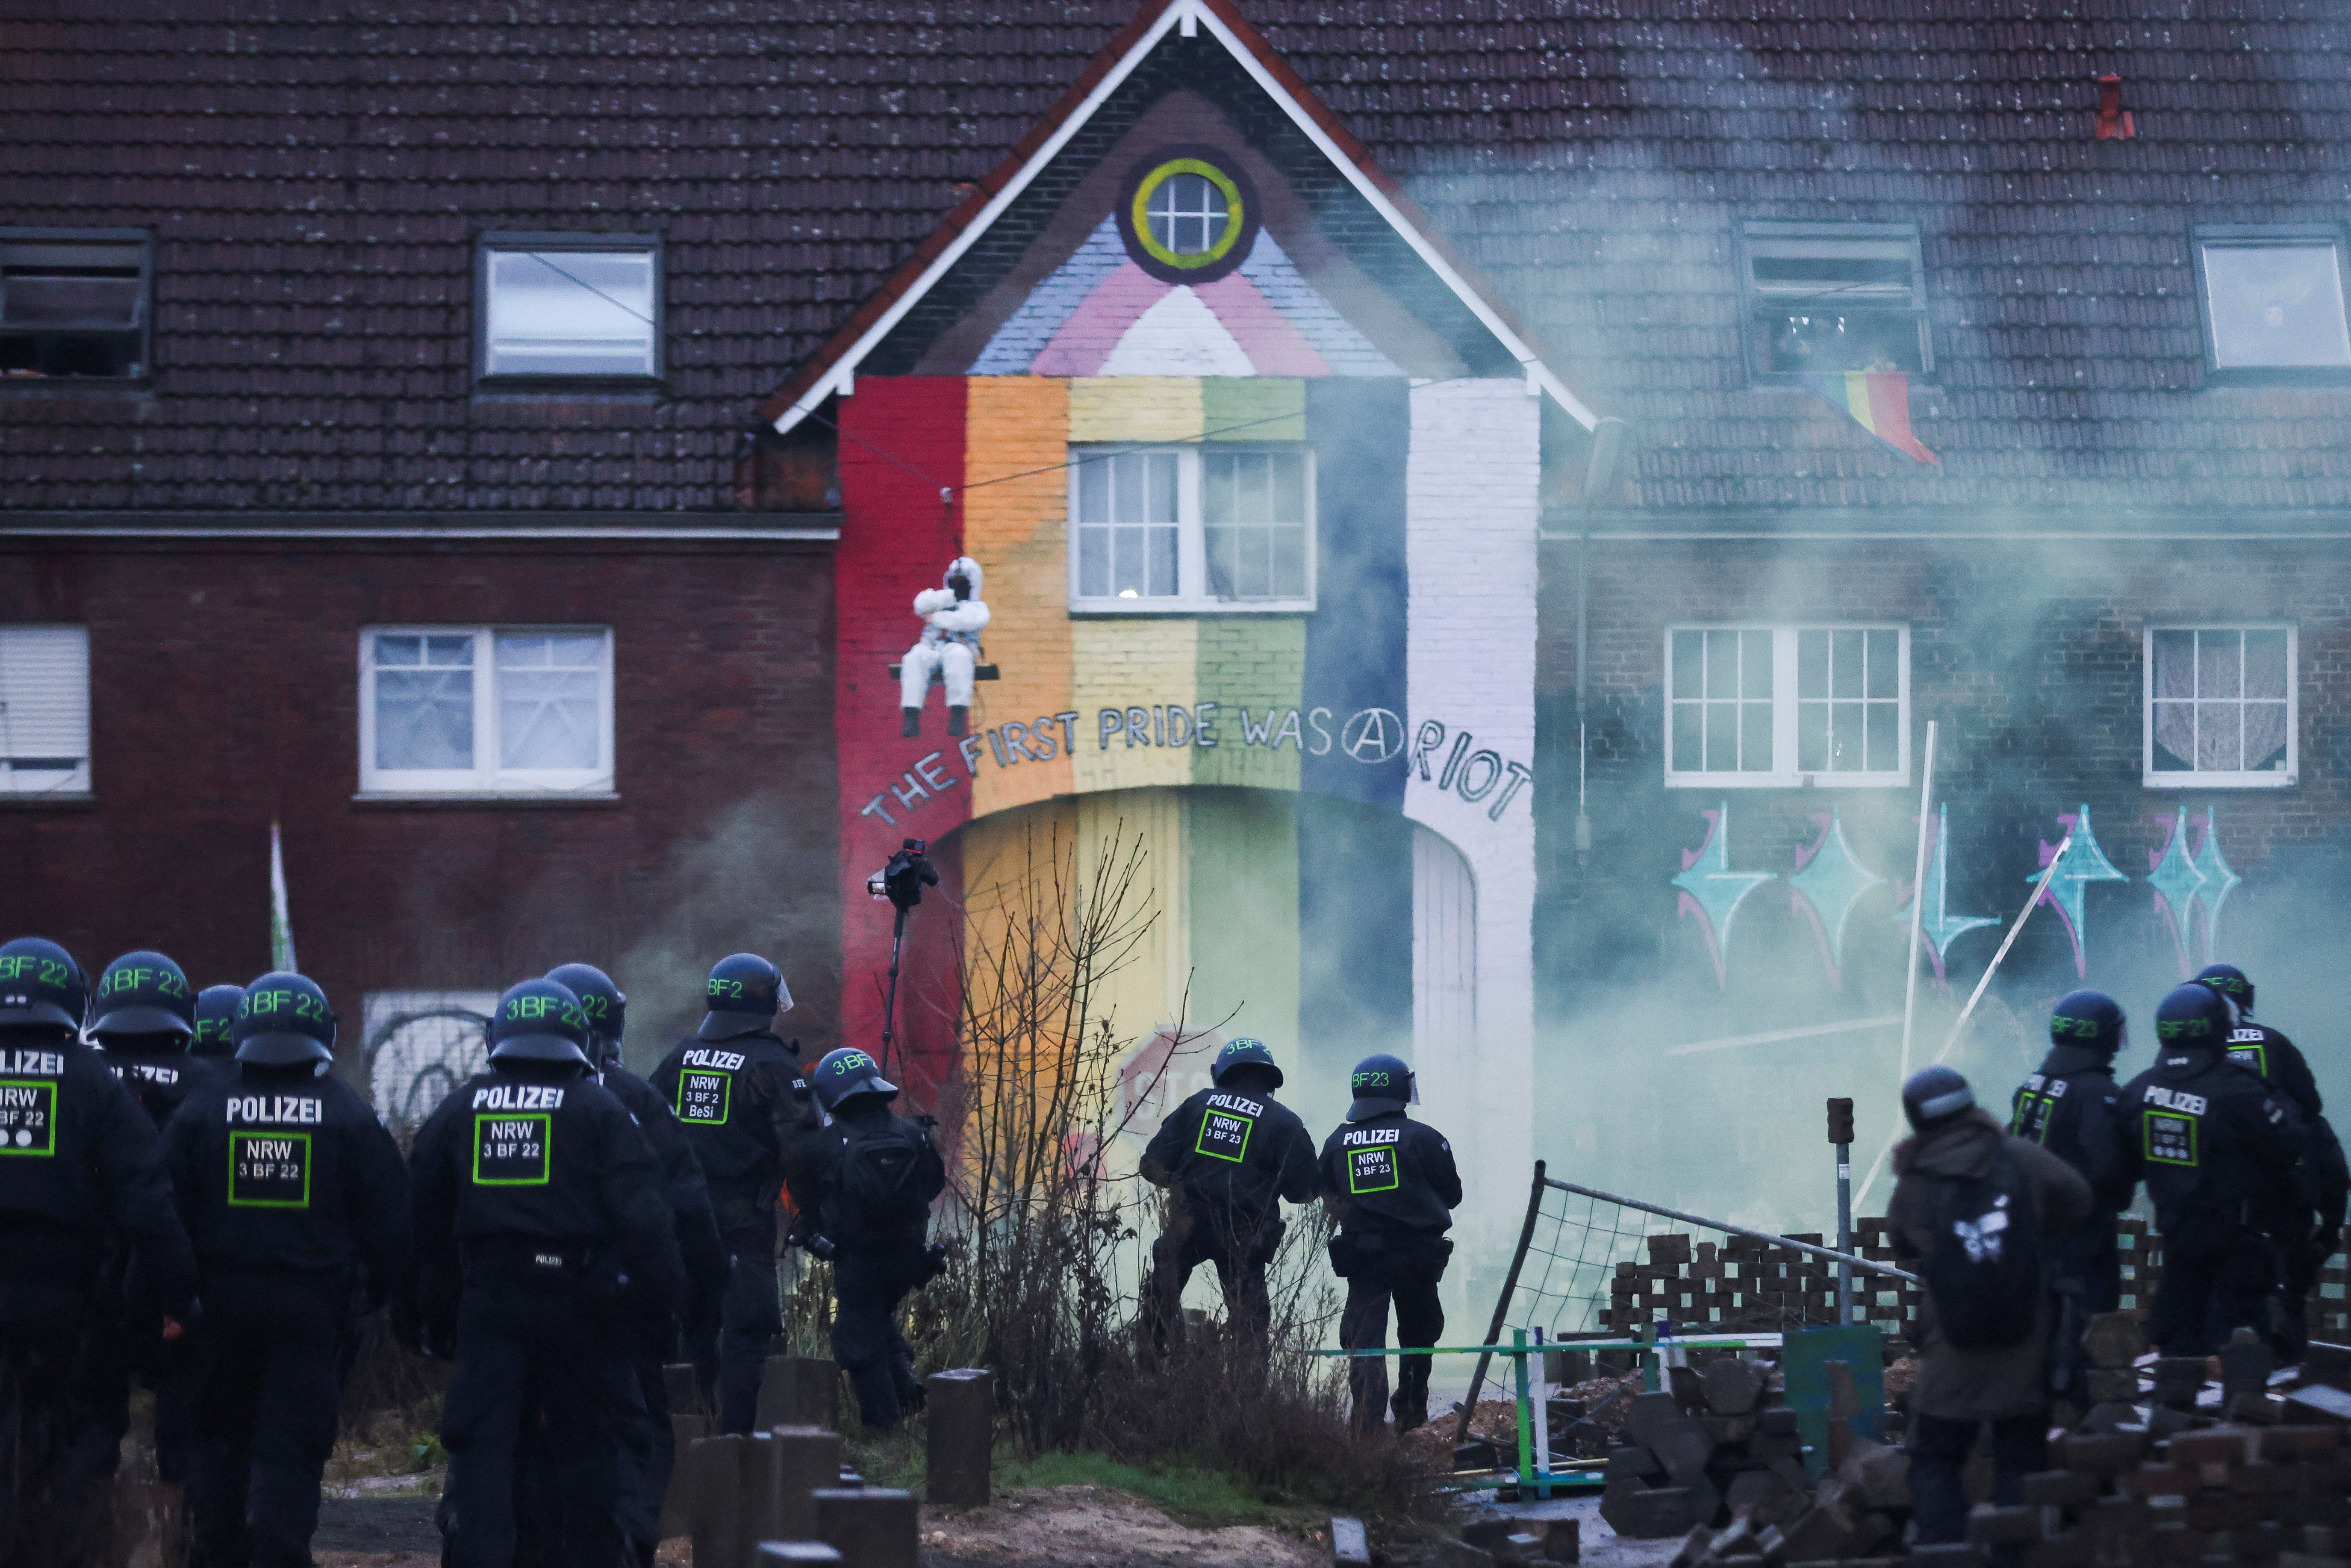 Clashes between German police and activists in a confrontation over the expansion of a coal mine in Luzerat